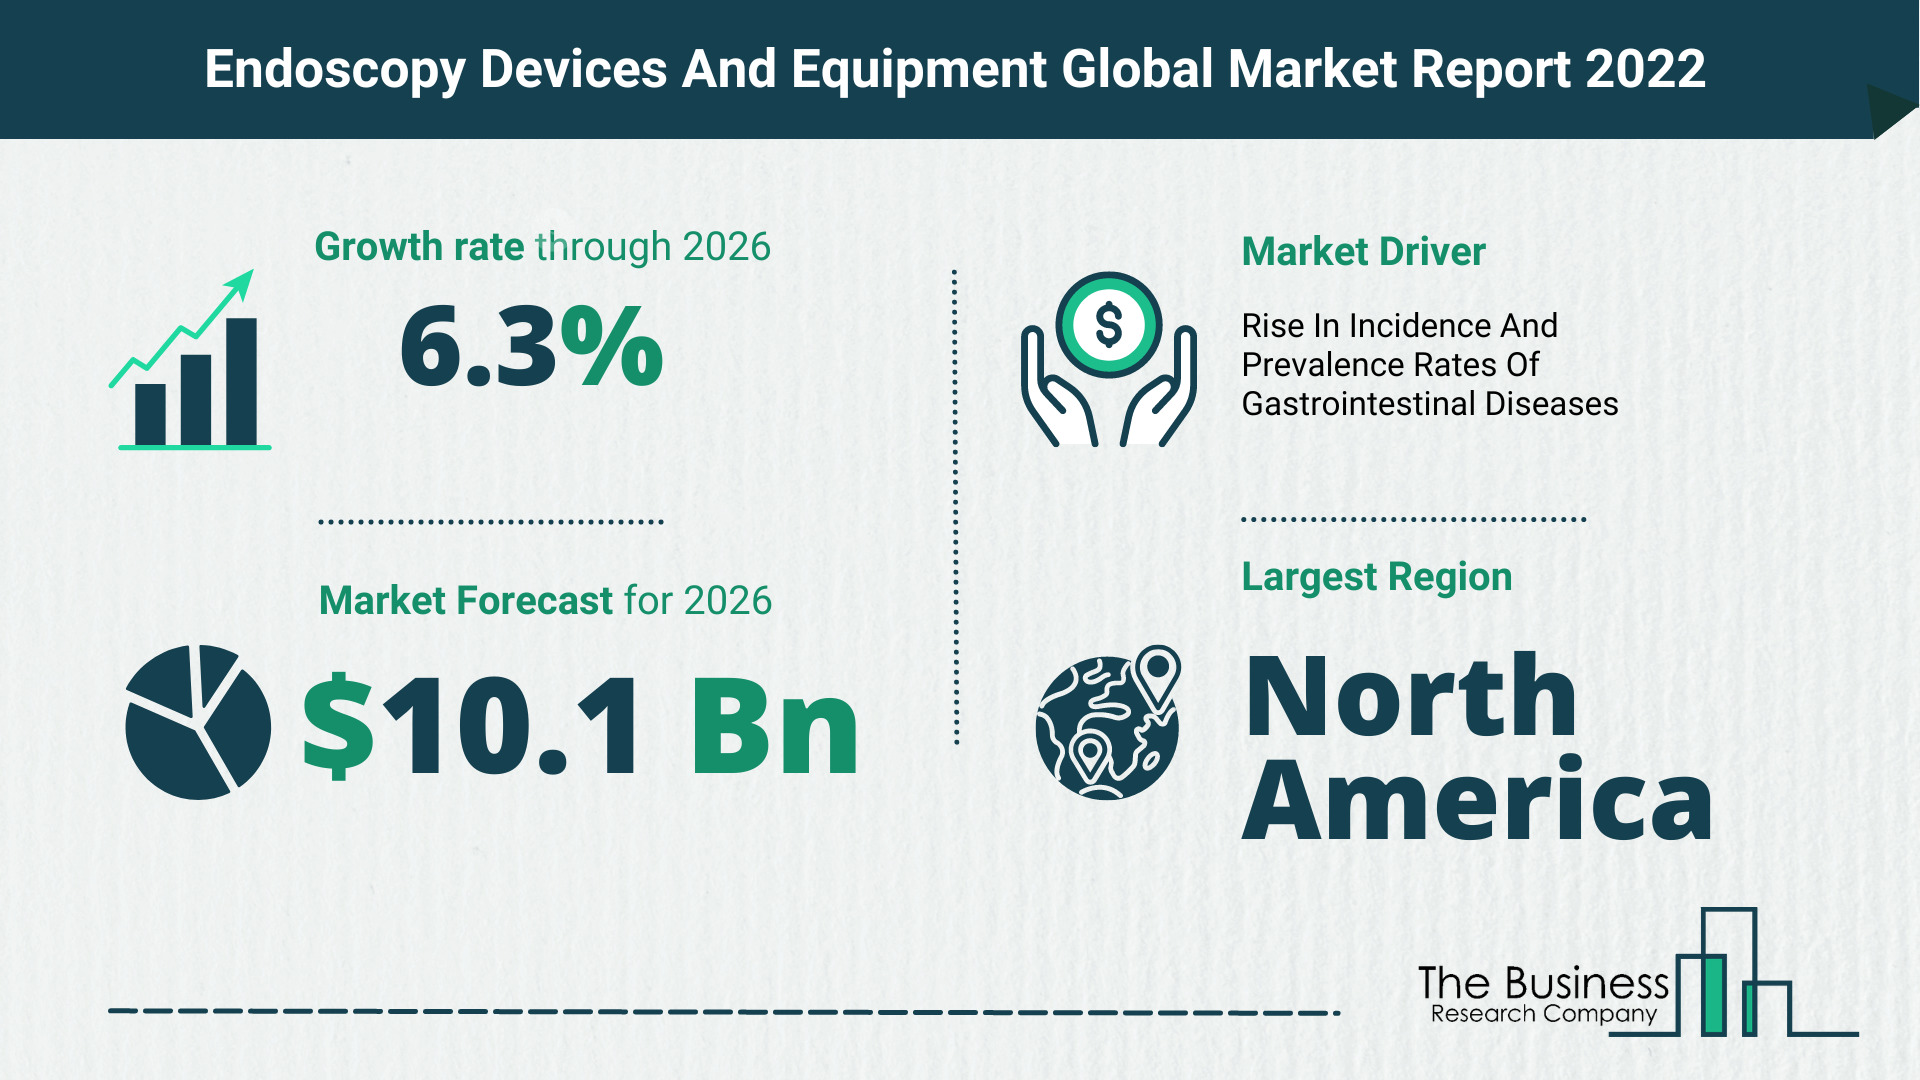 What Is The Endoscopy Devices And Equipment Market Overview In 2022?